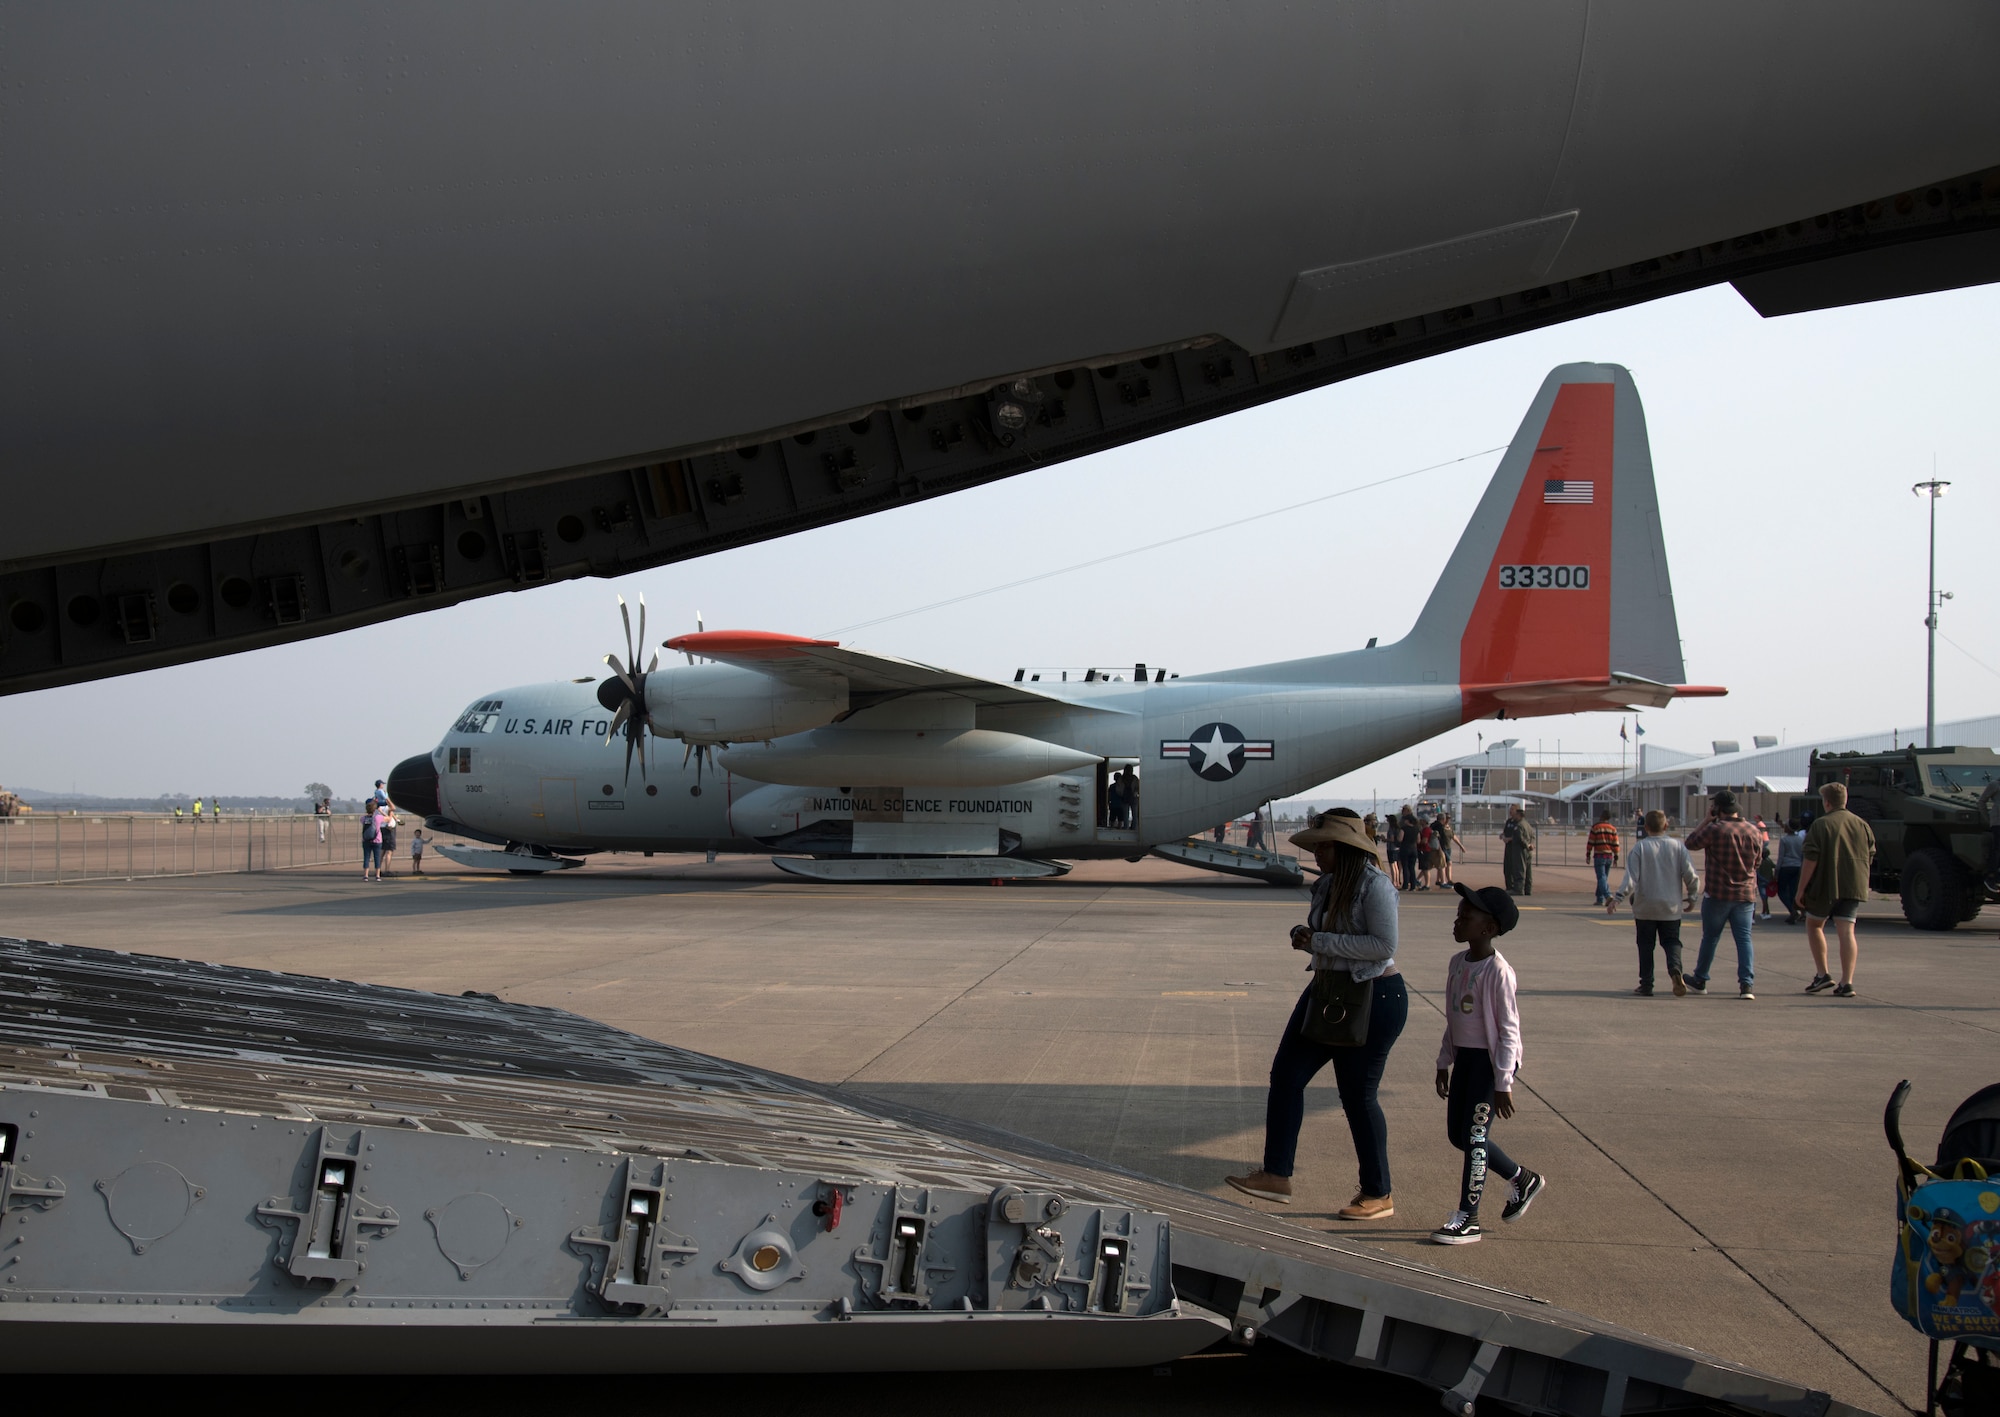 A New York Air National Guard  LC-130 Hercules sits as a static display at Waterkloof Air Force Base, South Africa, during the African Aerospace and Defense Exhibition, Sept. 22, 2018. The New York Air National Guard has sent five aircraft and 60 personnel to participate in the 2022 show Sept. 21-25.